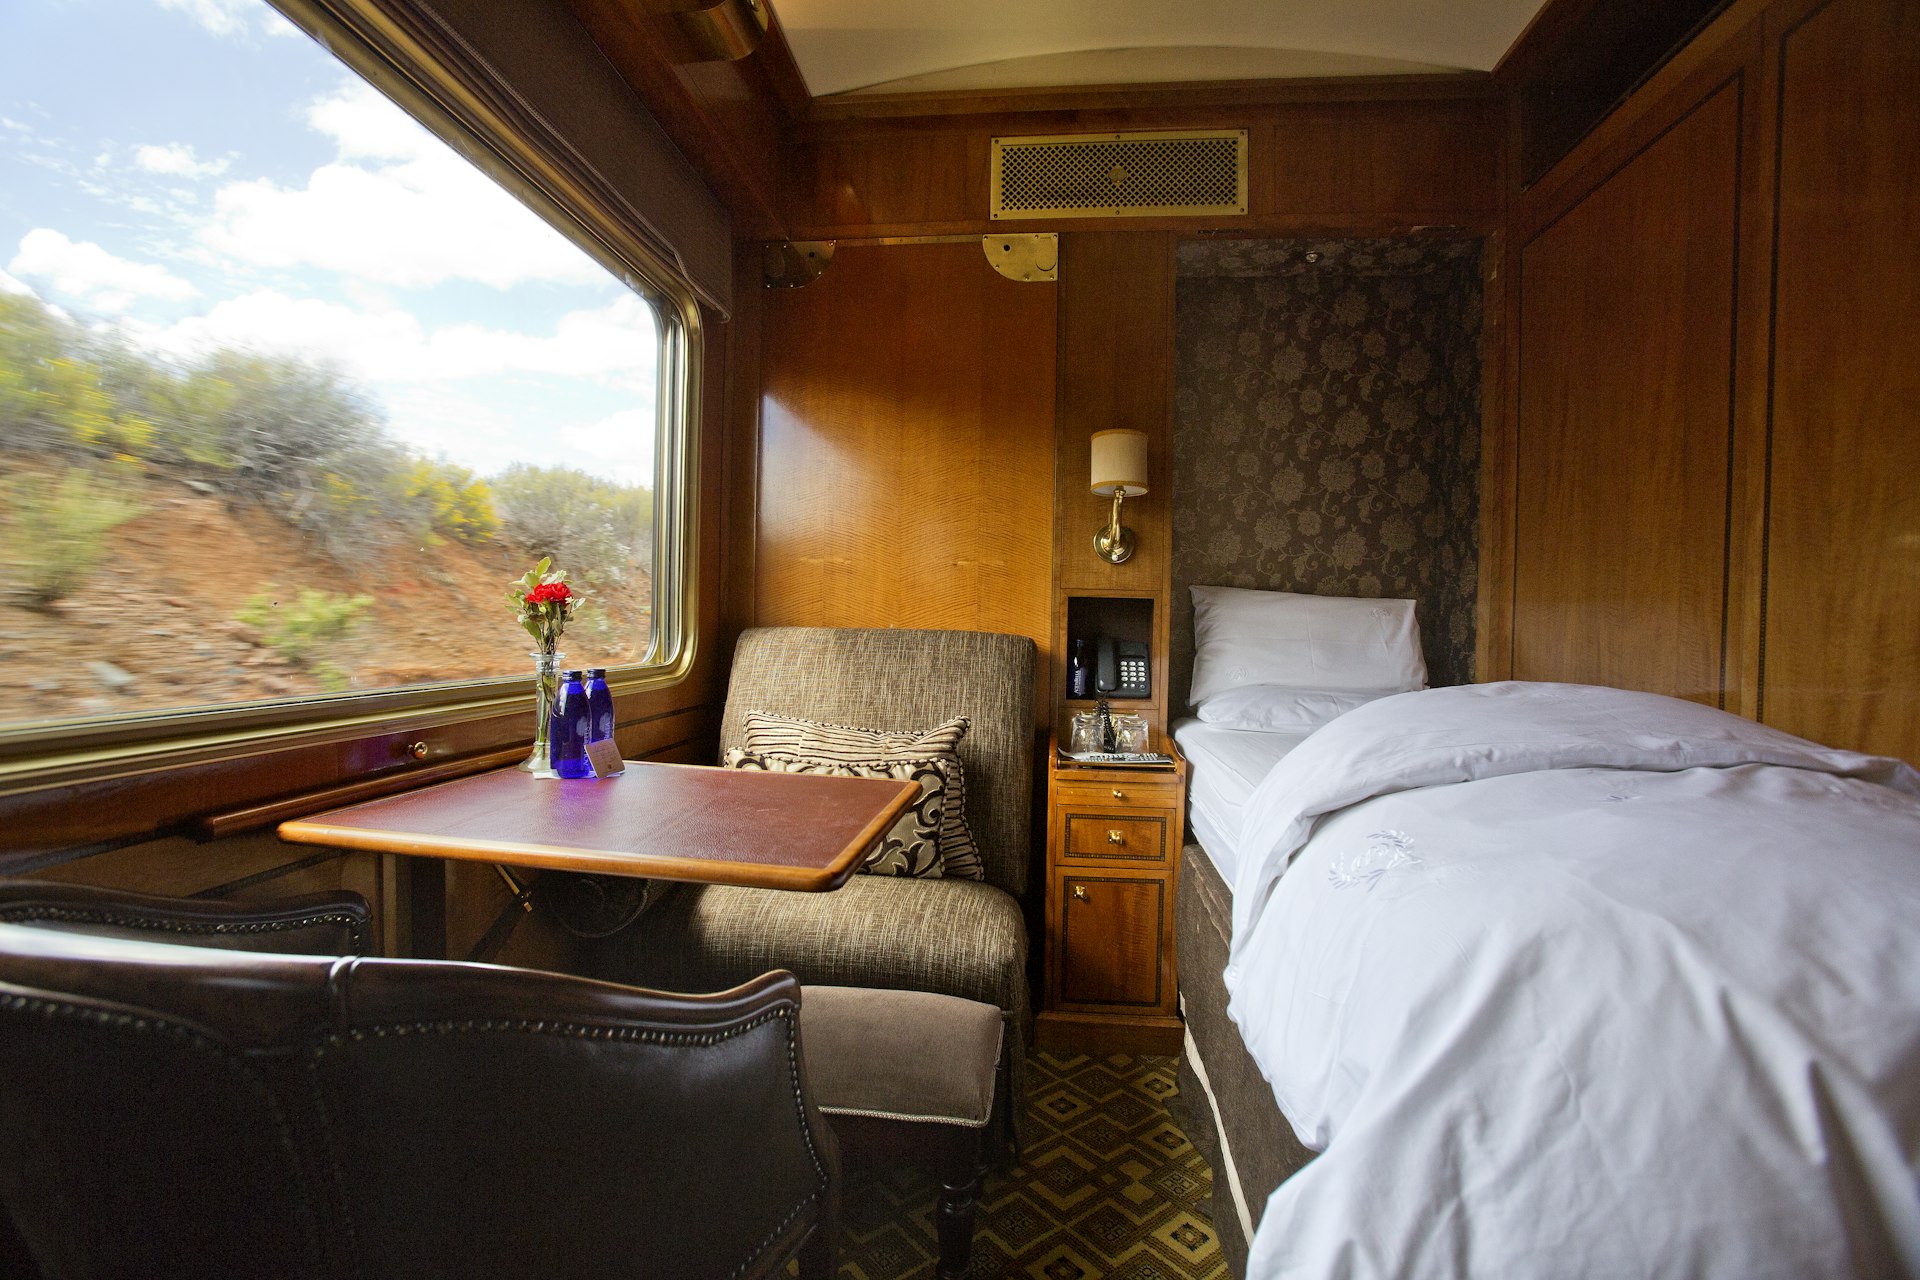 Interior of a sleeping cabin on The Blue Train in South Africa